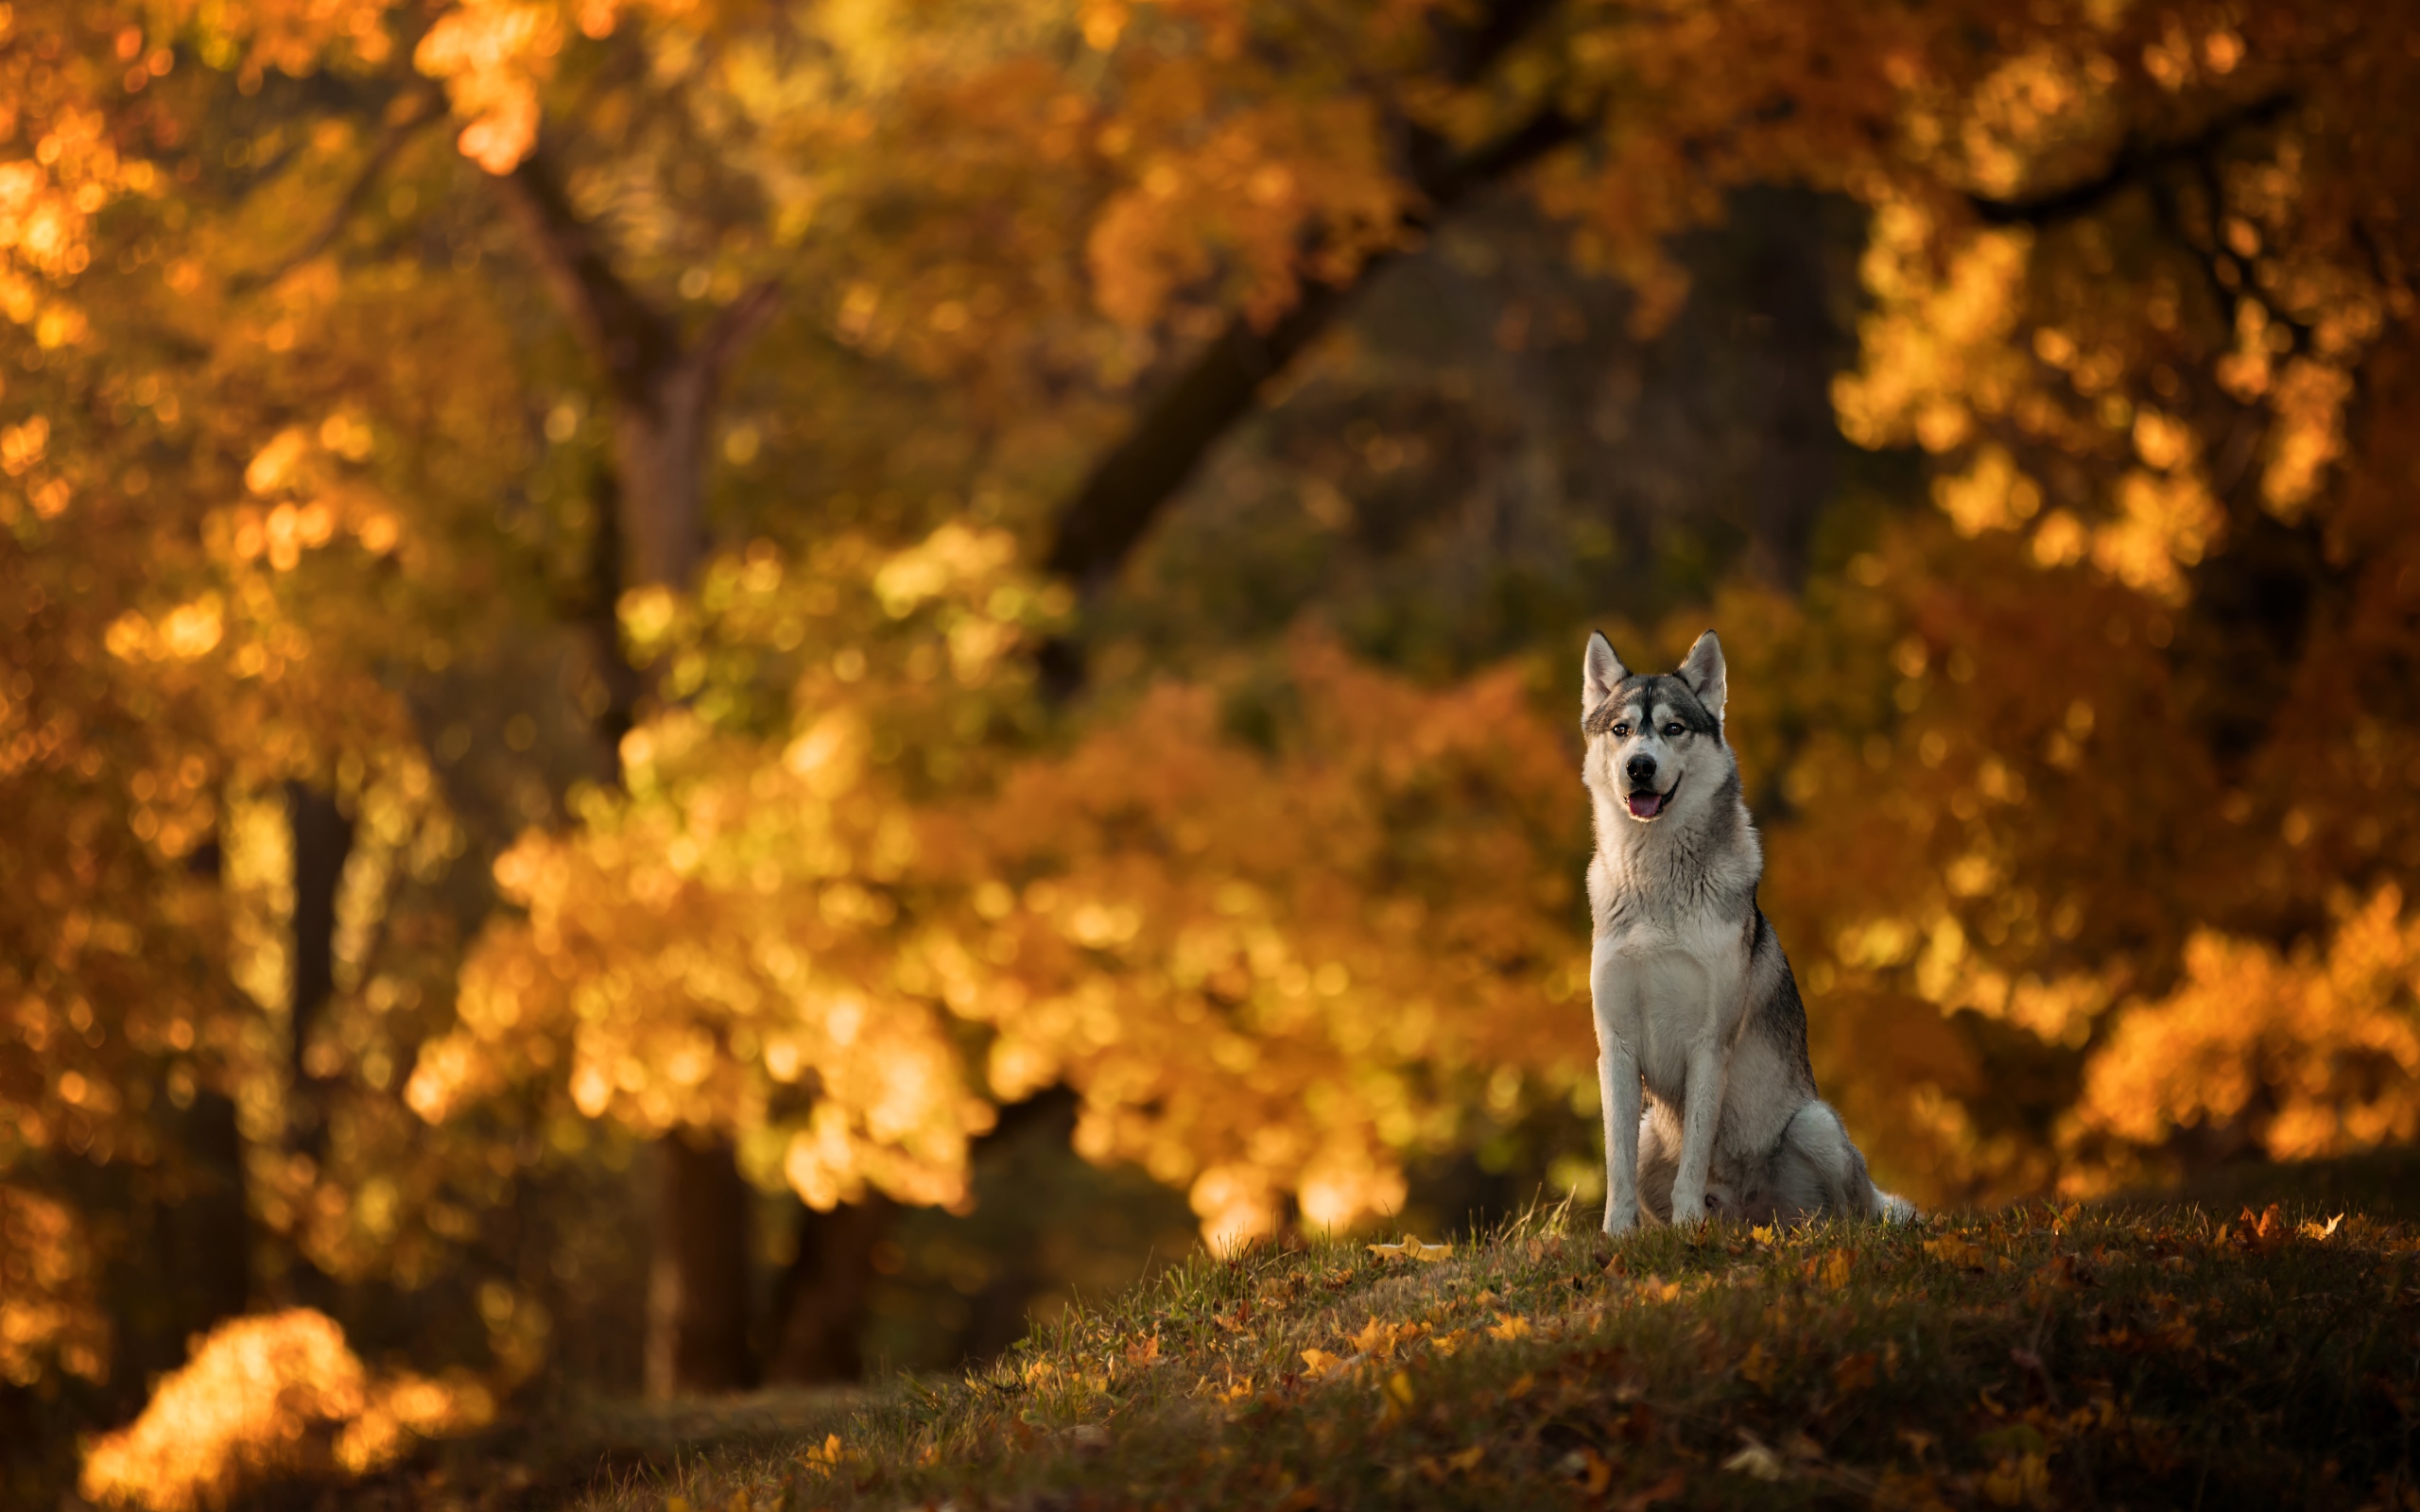 A dog of the Husky breed sits on a clearing in an autumn park